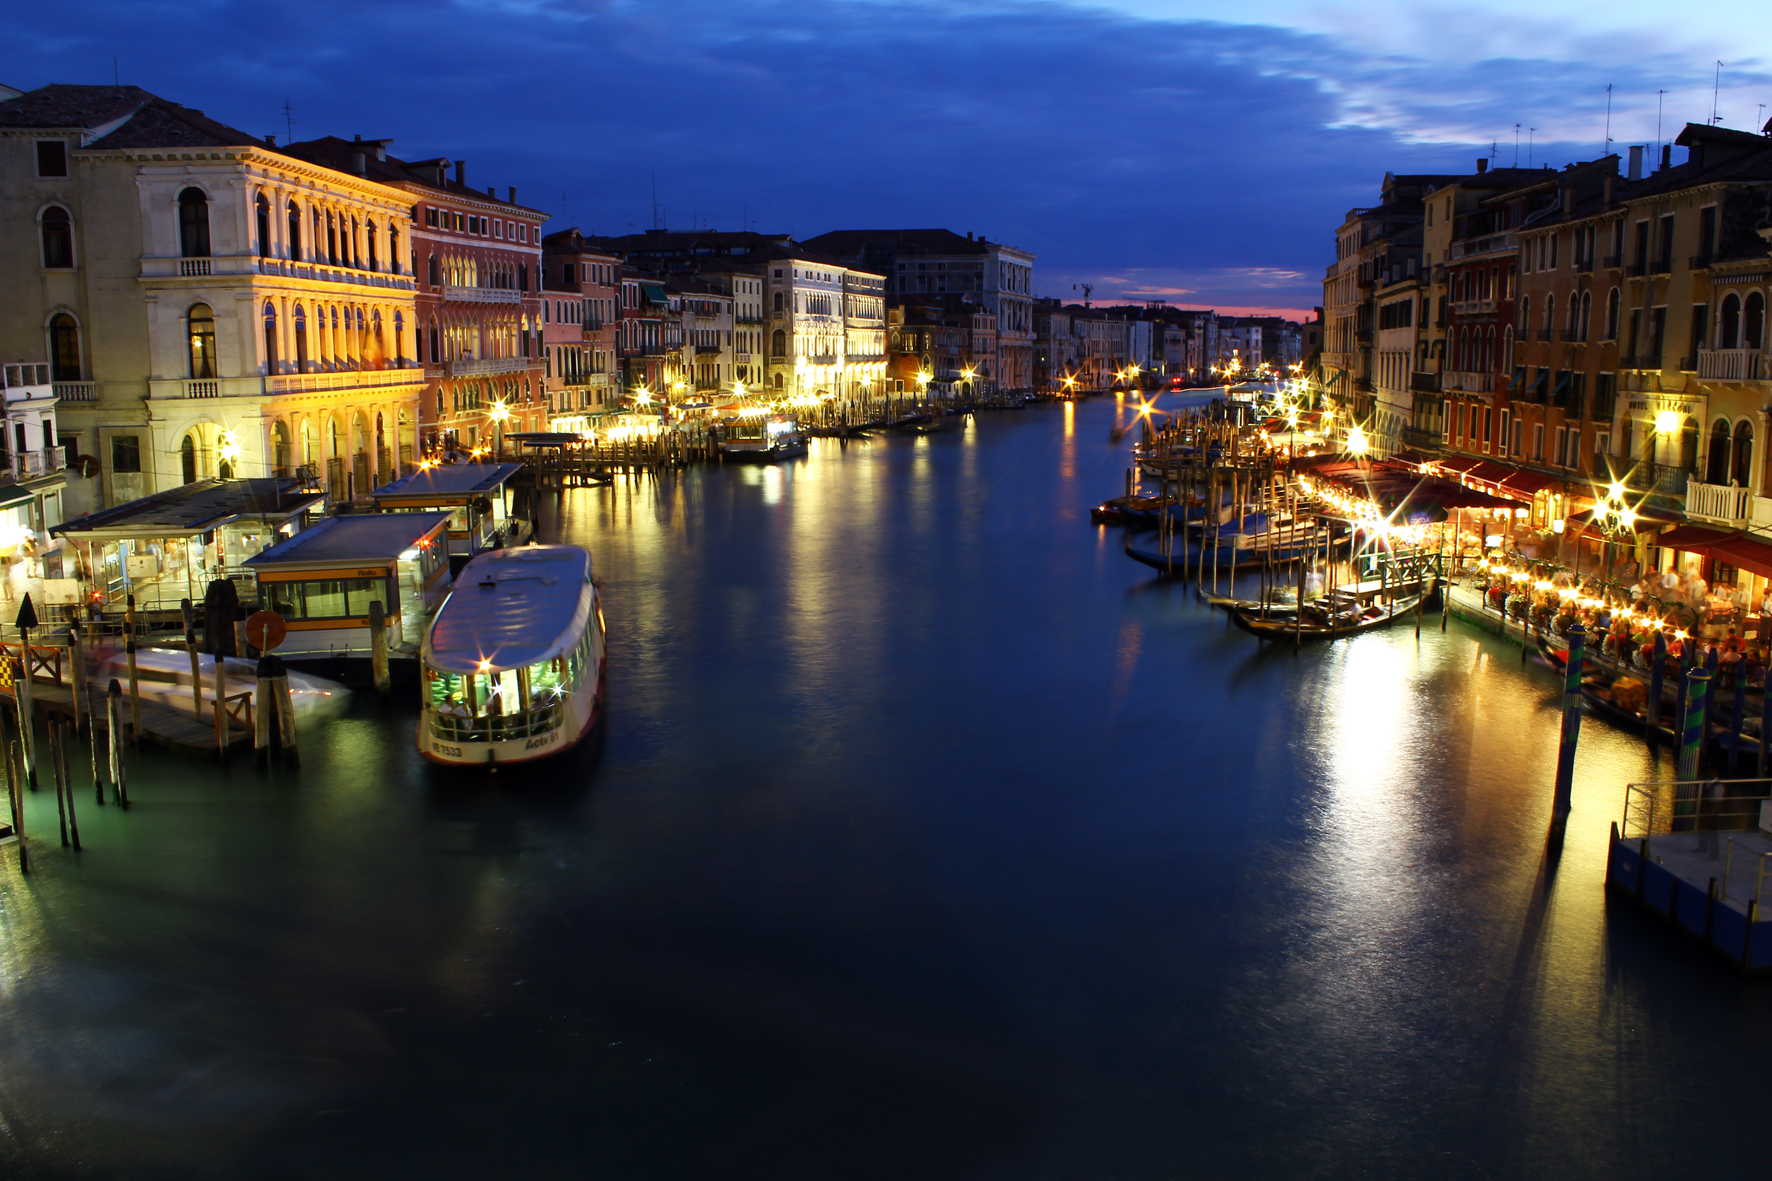 Grand Canal at sunset - Venice...